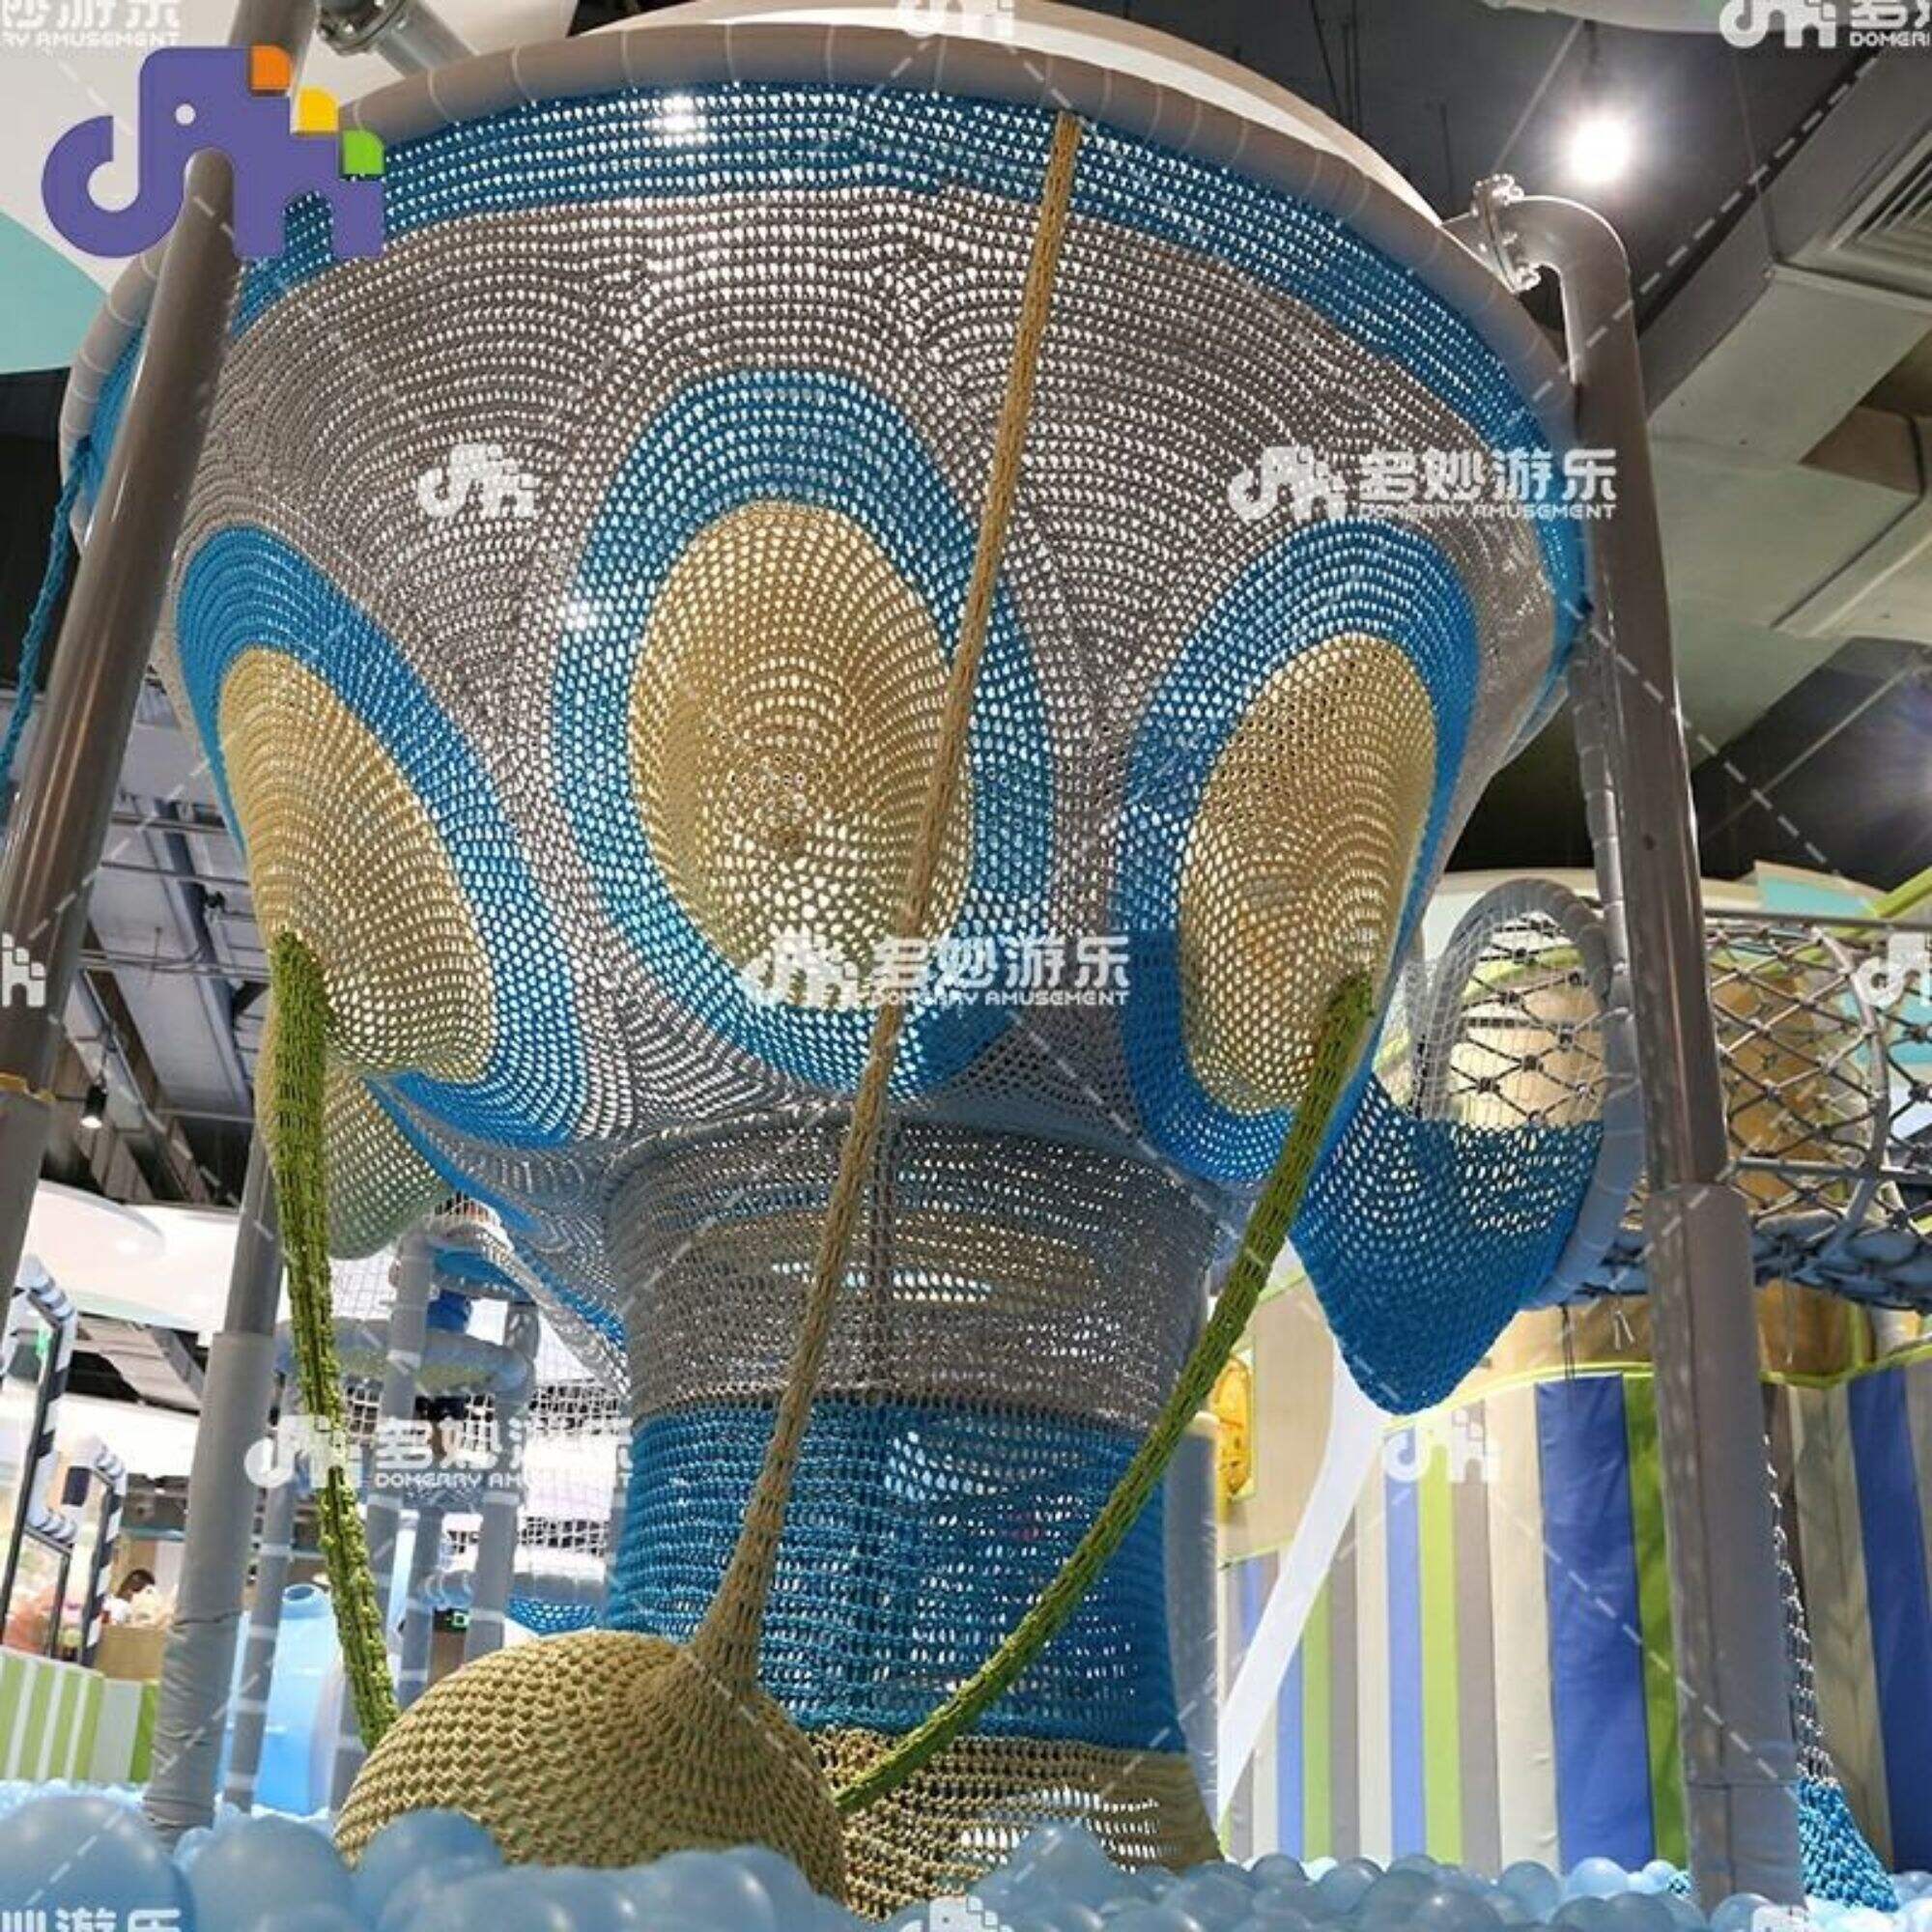 Customized Commercial Spider Climbing Net for Kids Toddler Playground Indoor Amusement Park Equipment